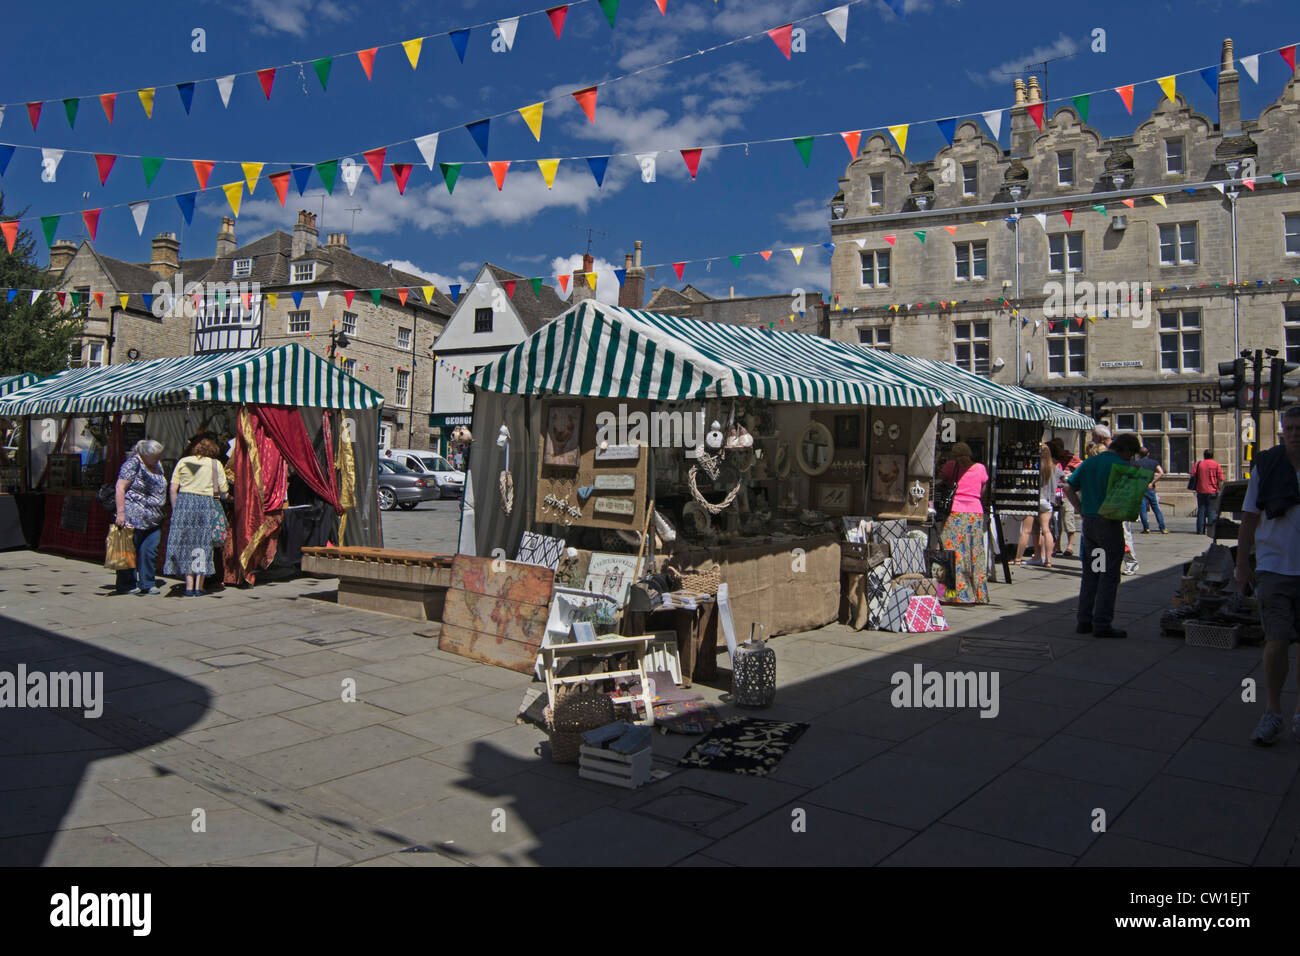 Market Stalls in Red Lion Square, Stamford, South Kesteven district of the county of Lincolnshire, England, UK Stock Photo